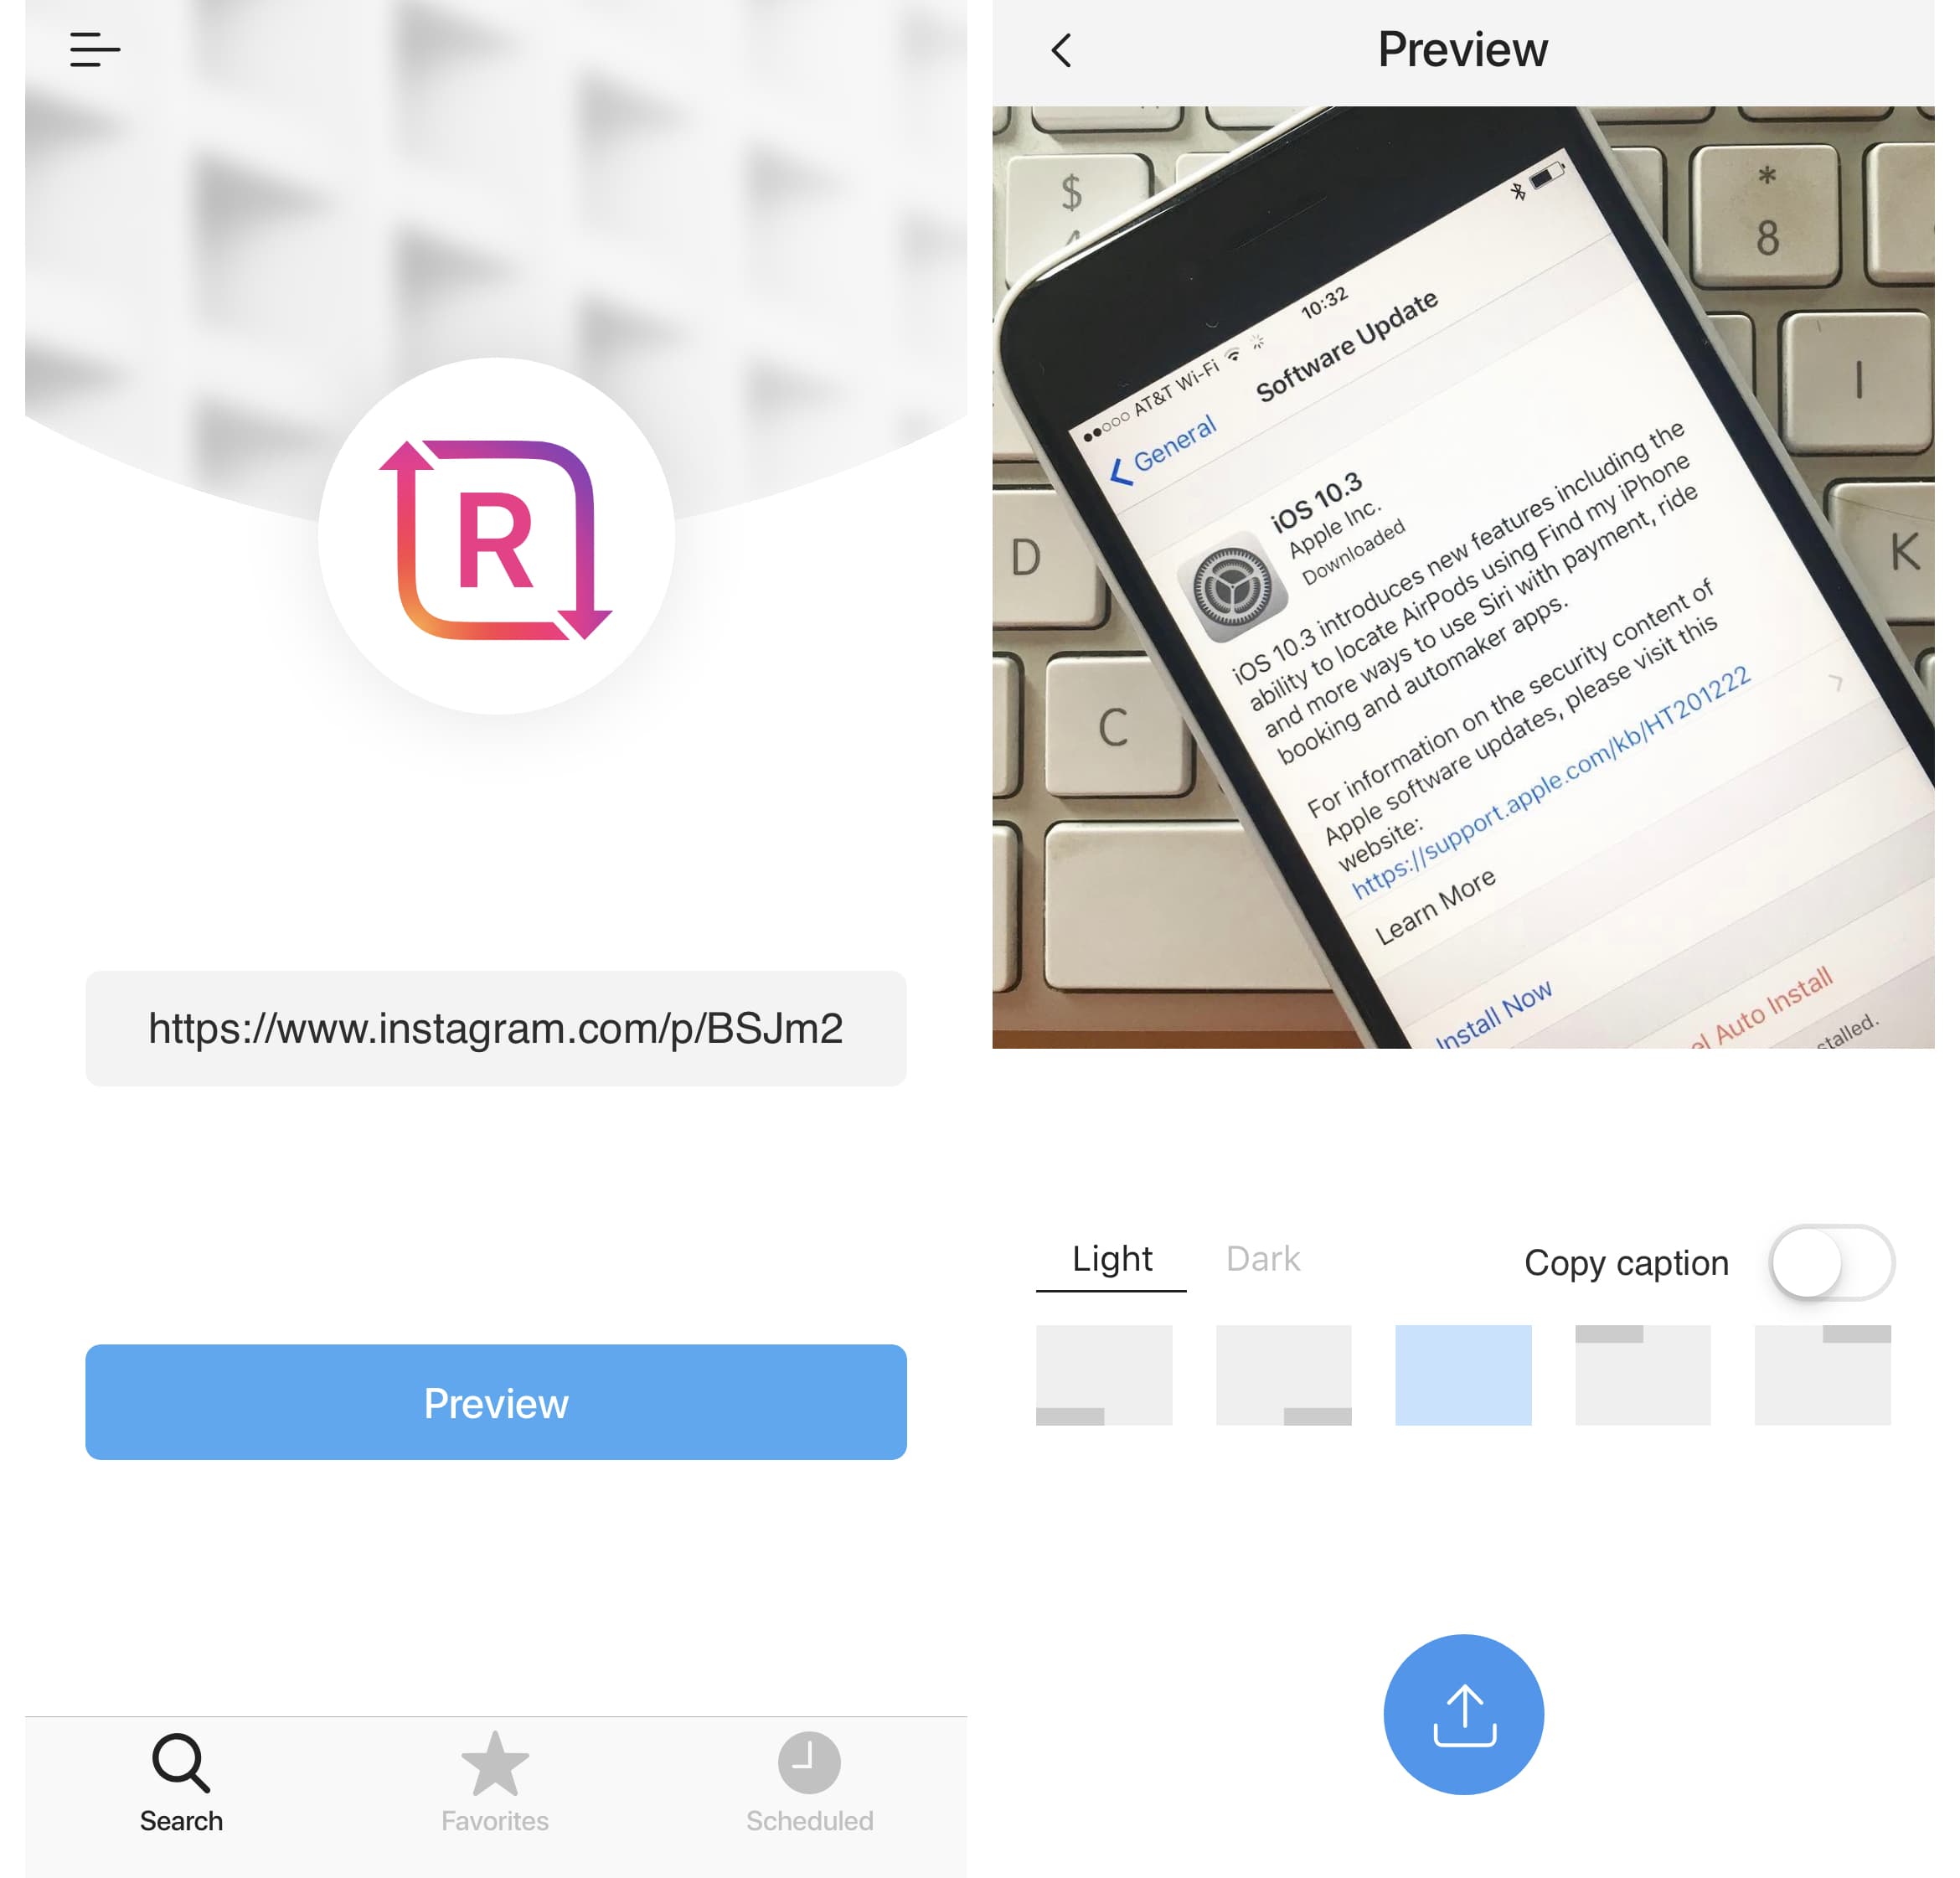 preview instagram photo to repost